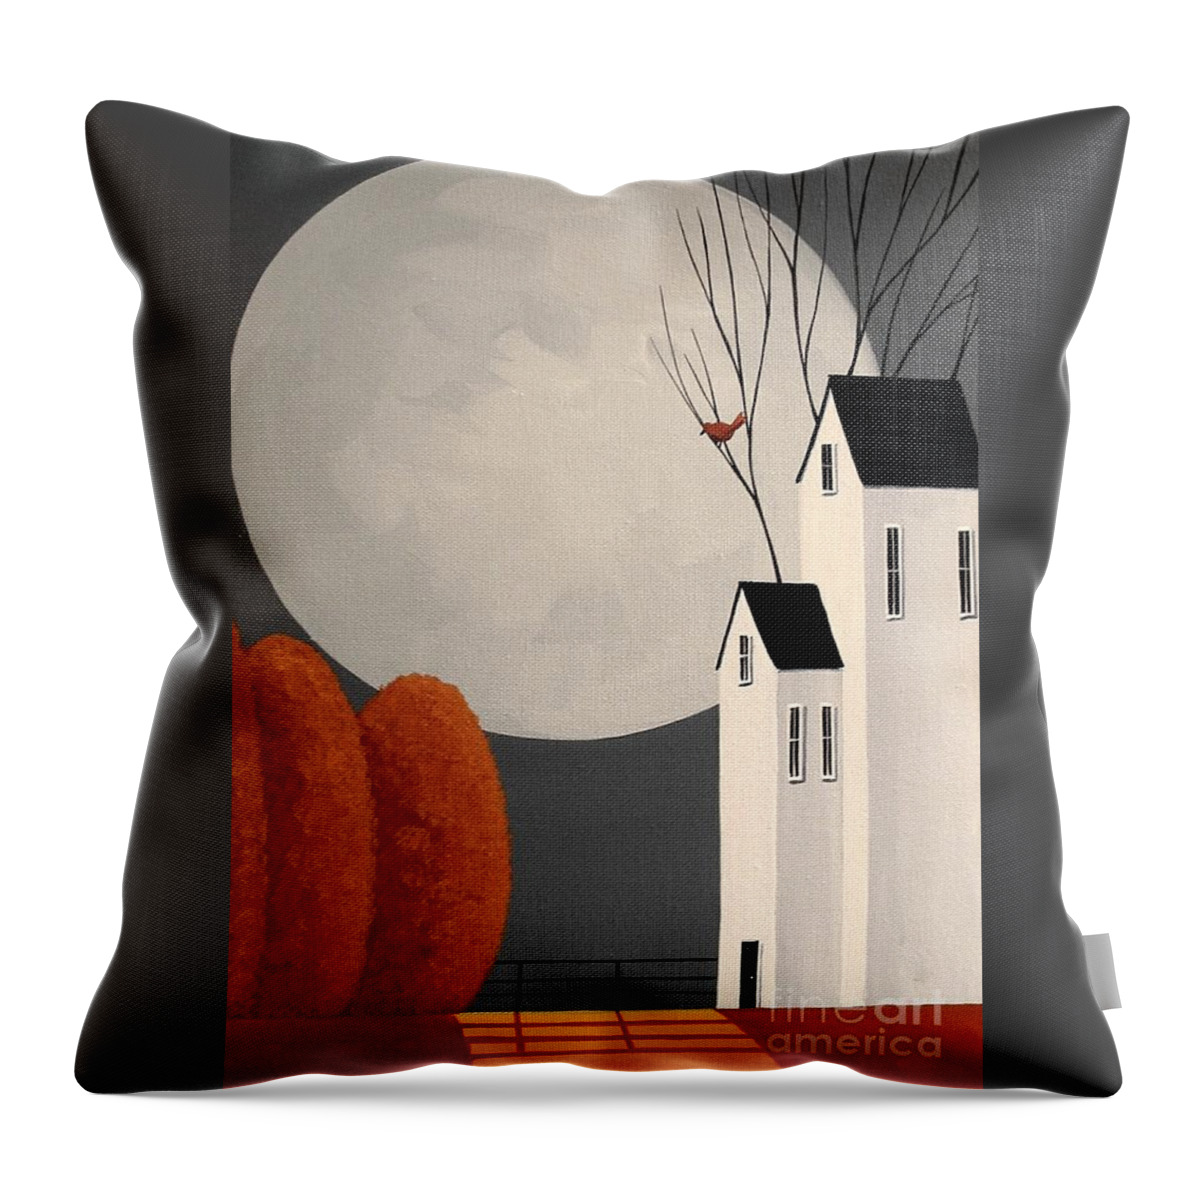 Bird Throw Pillow featuring the painting A Little Bird Told Me by Debbie Criswell